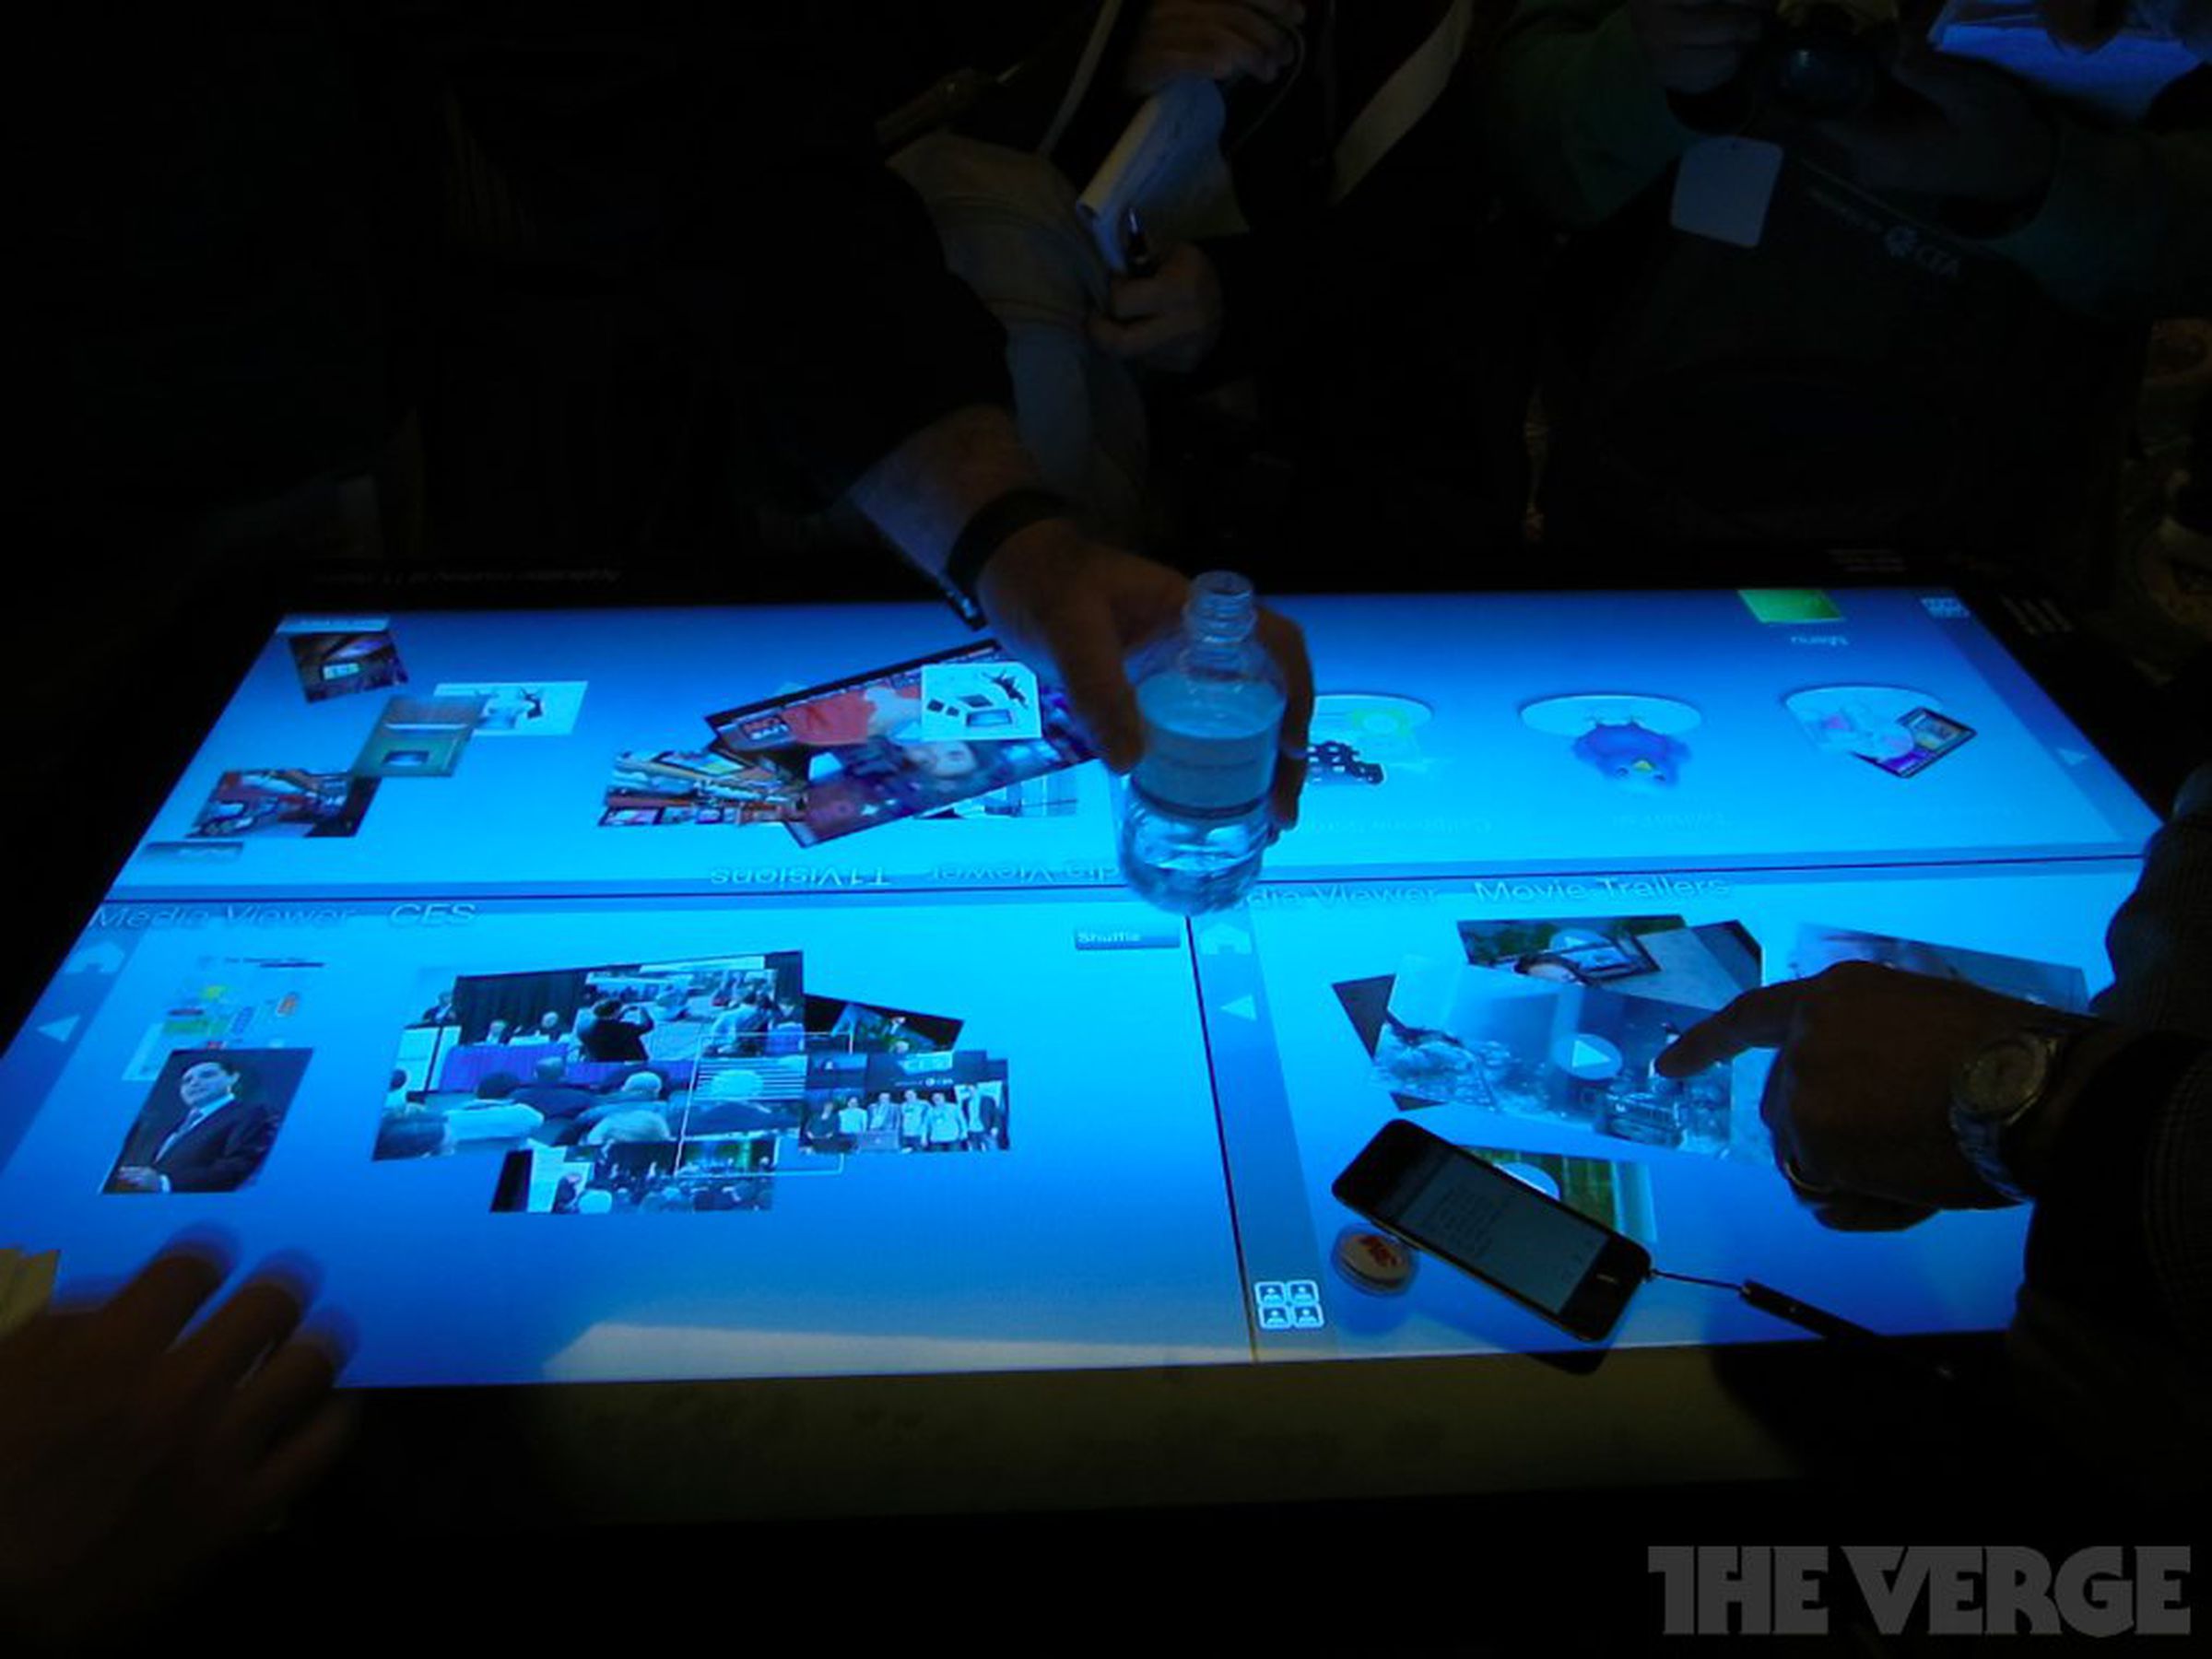 3M 46-inch multitouch table hands-on pictures